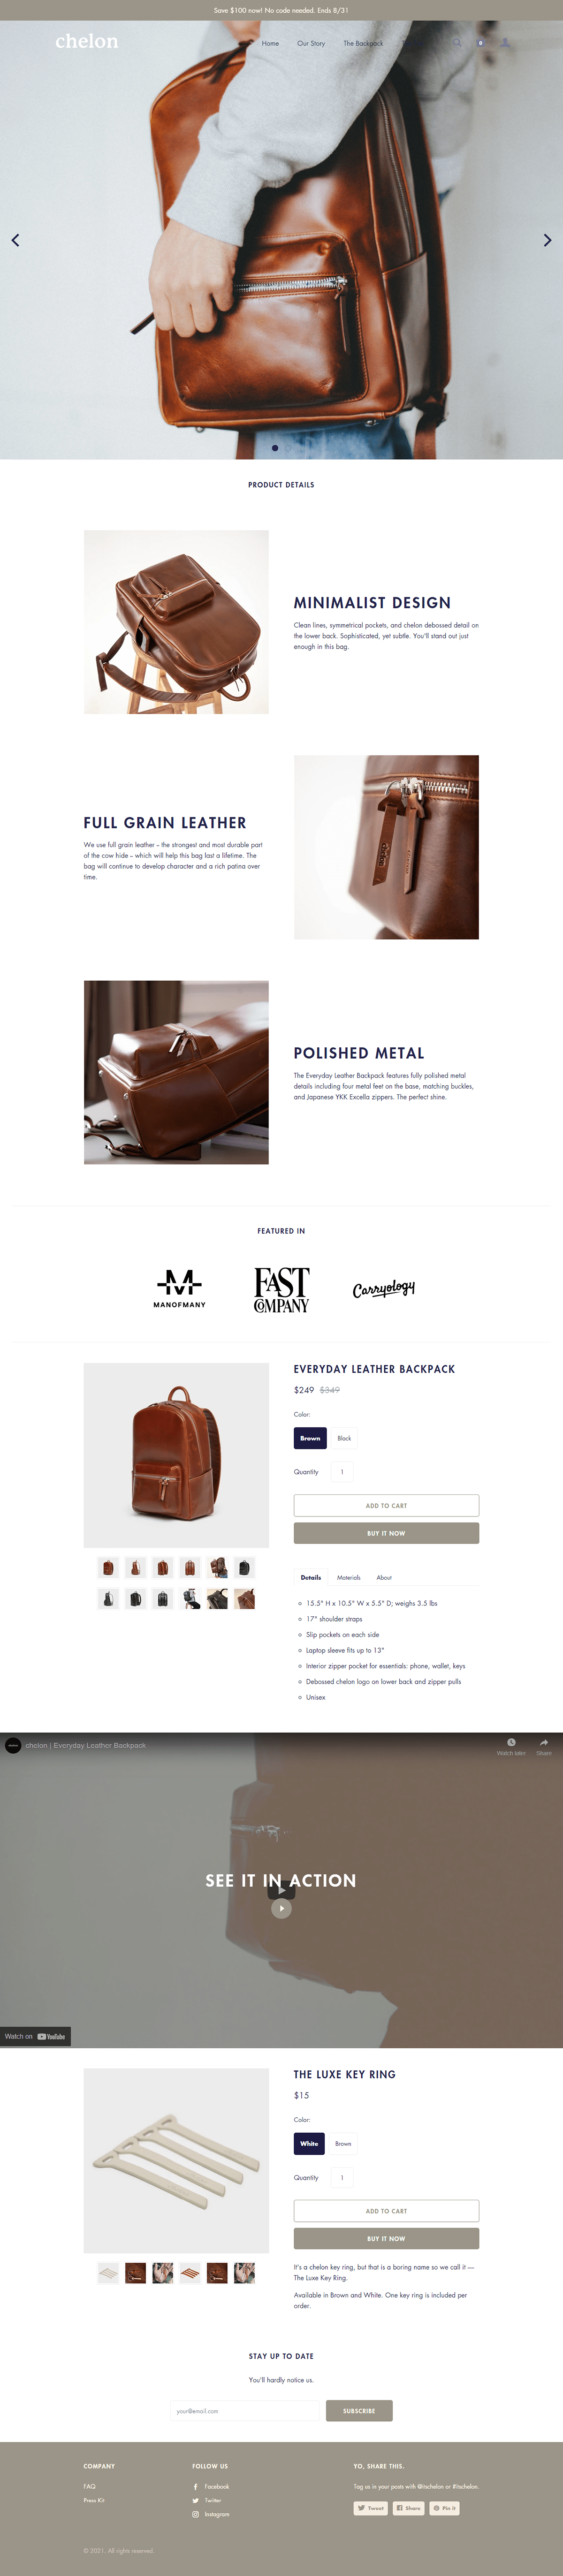 Shopify Website Design Shopify website dropshipping store shopify experts One product store Shopify dropshipping shogun shopify store PageFly gempage